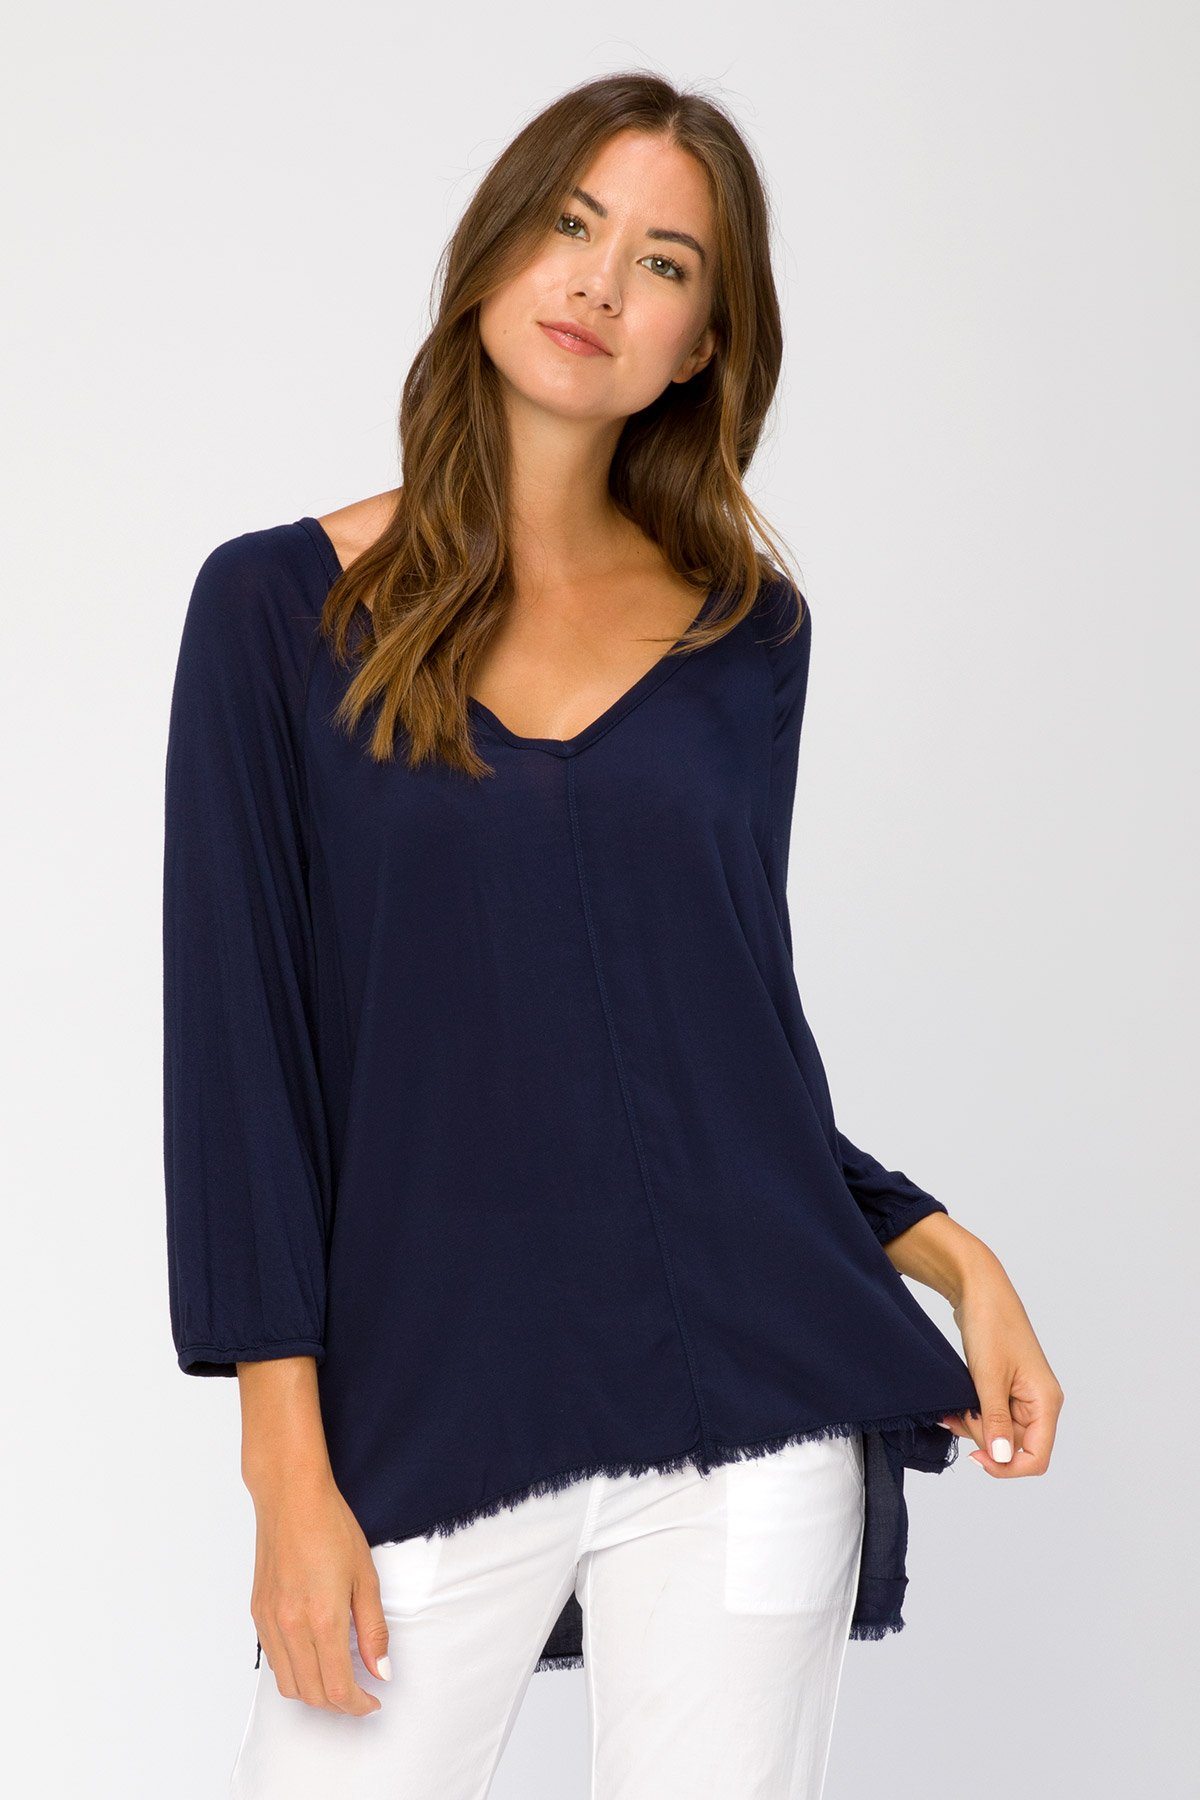 Image of The Voile Honest Top